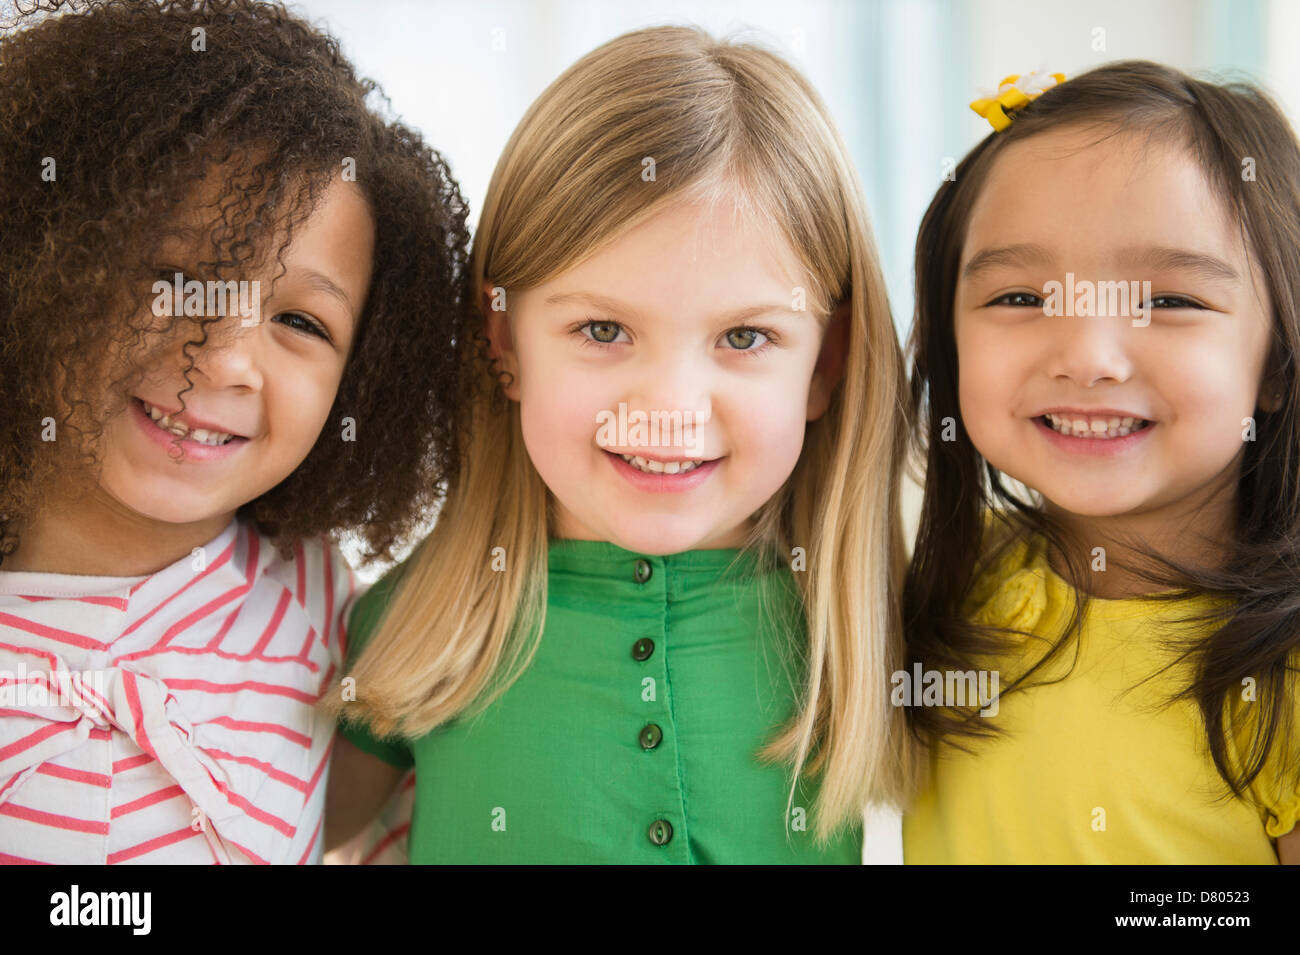 Girls smiling together Stock Photo